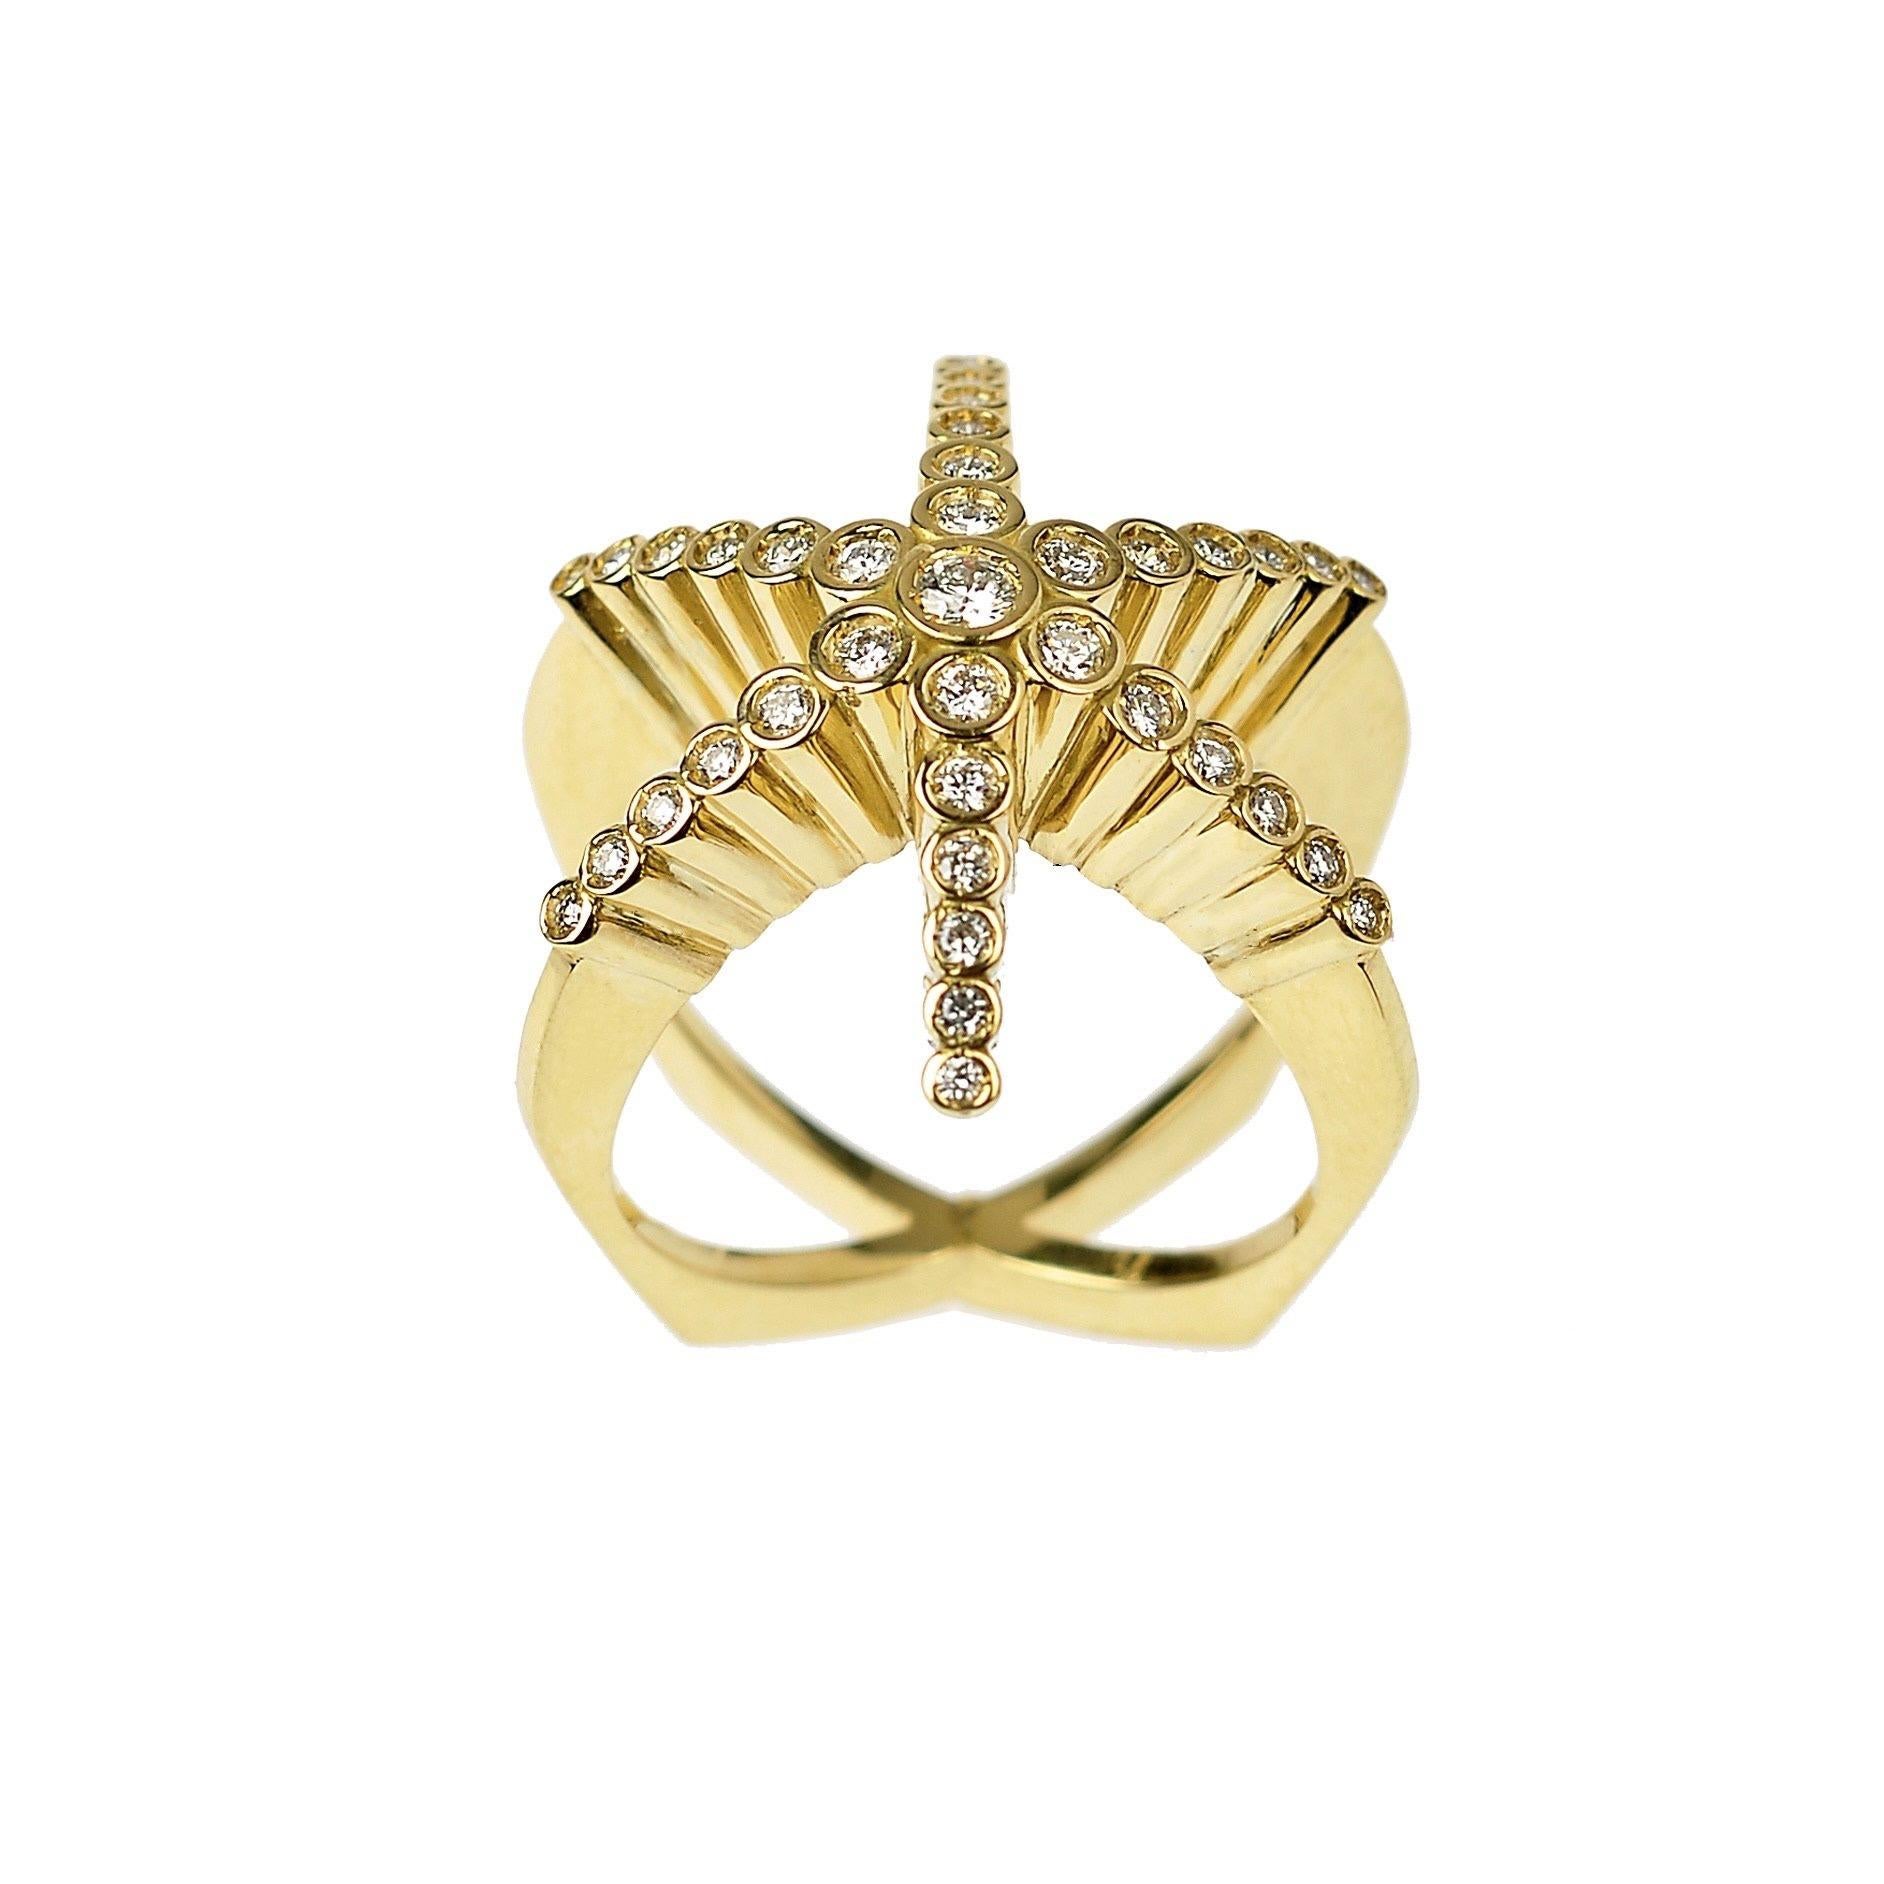 The ‘Finger hugging Star’, ring is crafted in 18K yellow gold hallmarked in Cyprus. This spectacular statement ring, comes in a highly polished finish and features White VS, Diamonds totaling 0,63 Cts. One of Maria Kotsonis’s most popular stand